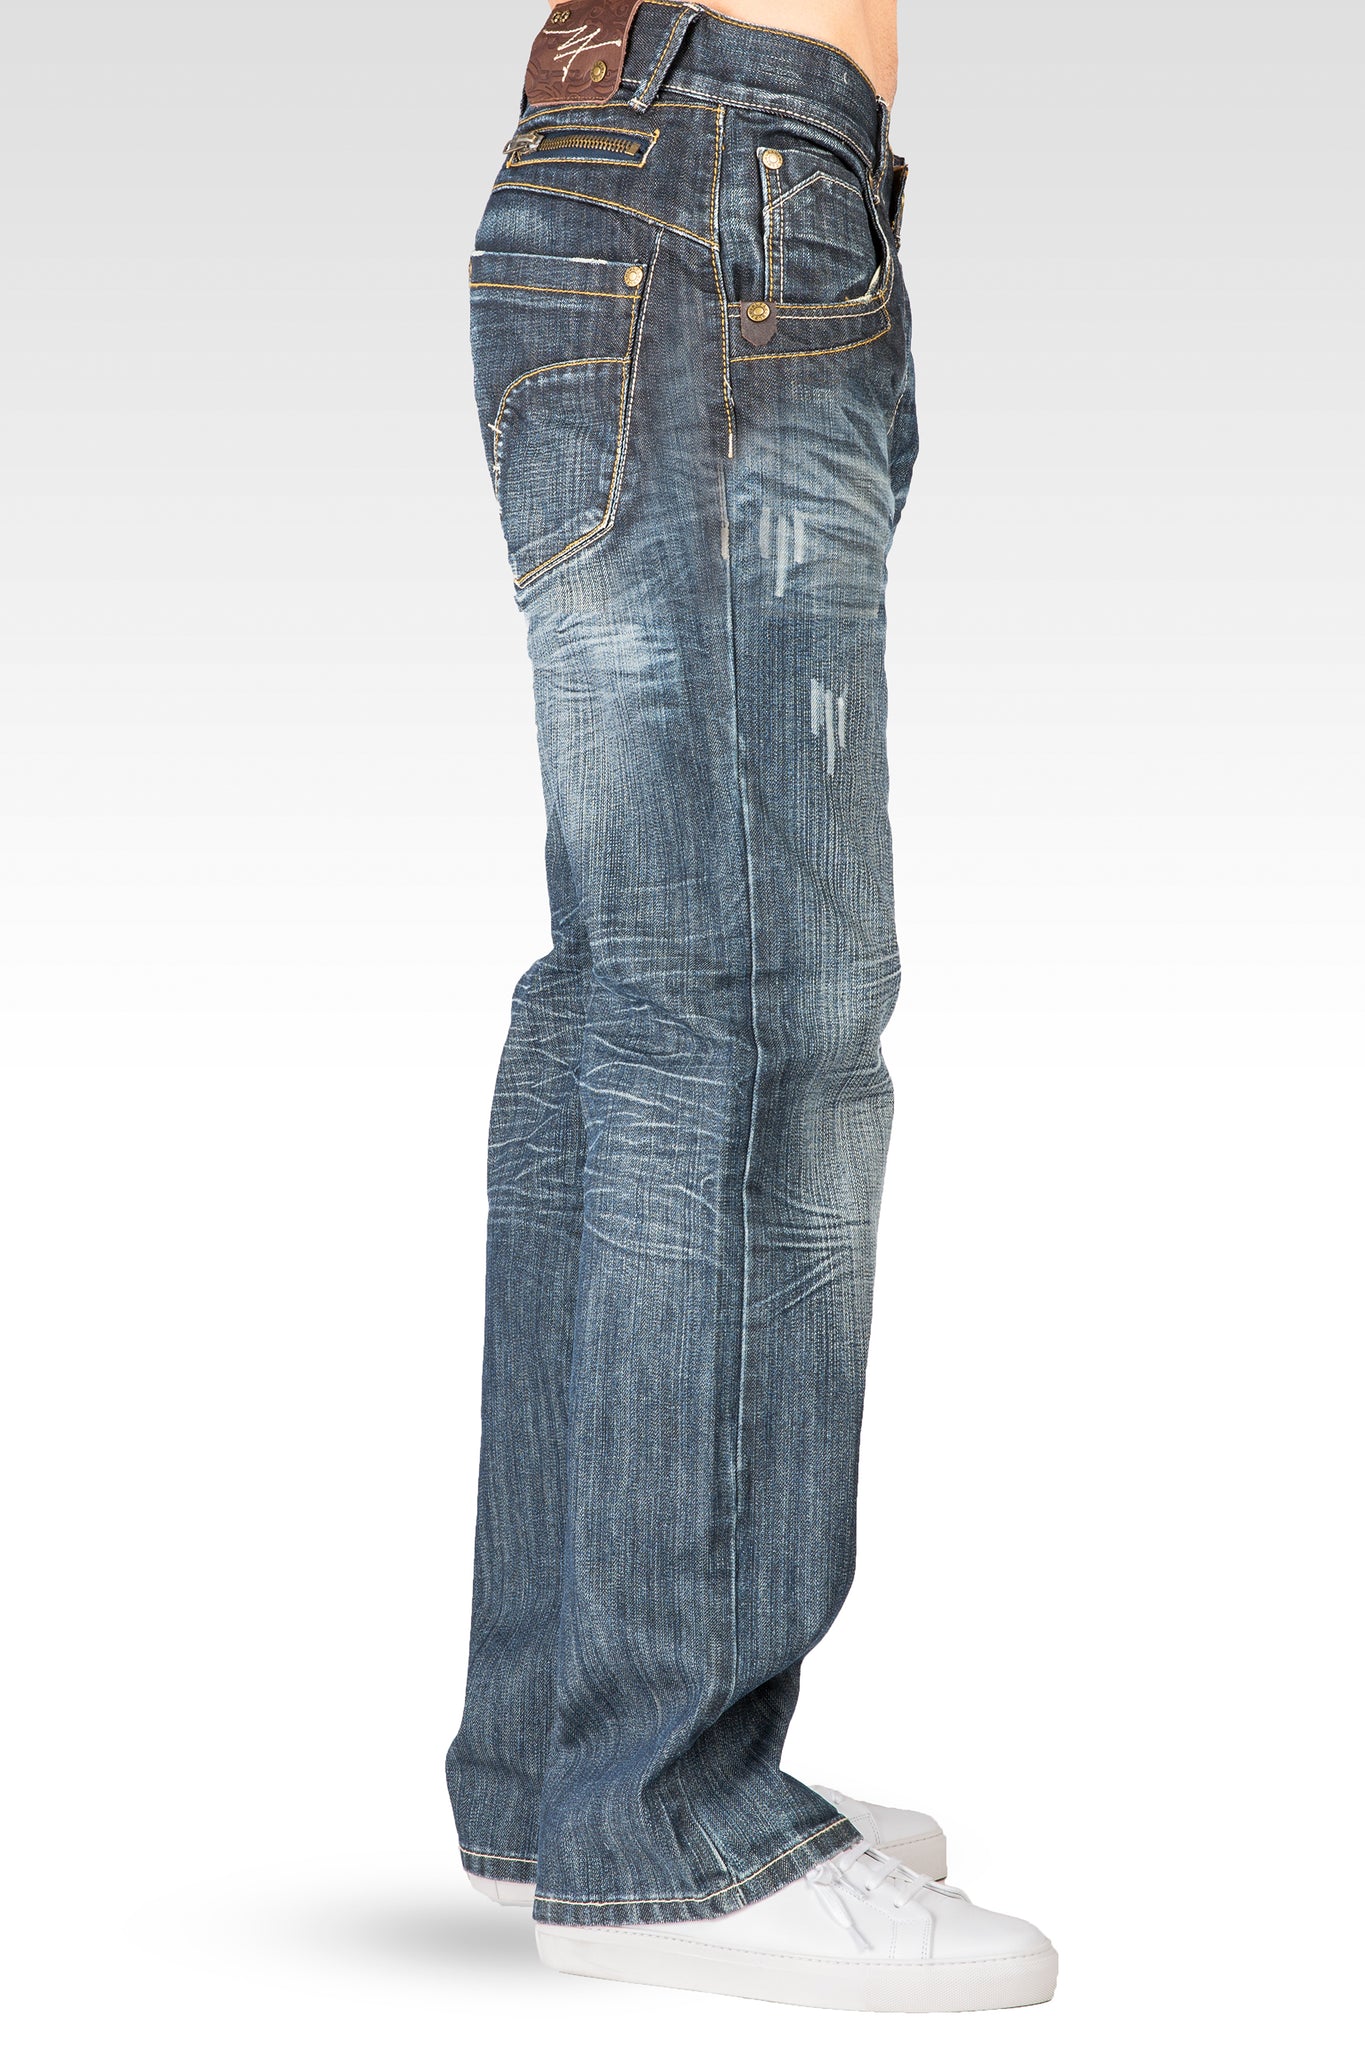 Level 7 Men's Zipper Utility Pocket Relaxed Bootcut Distressed